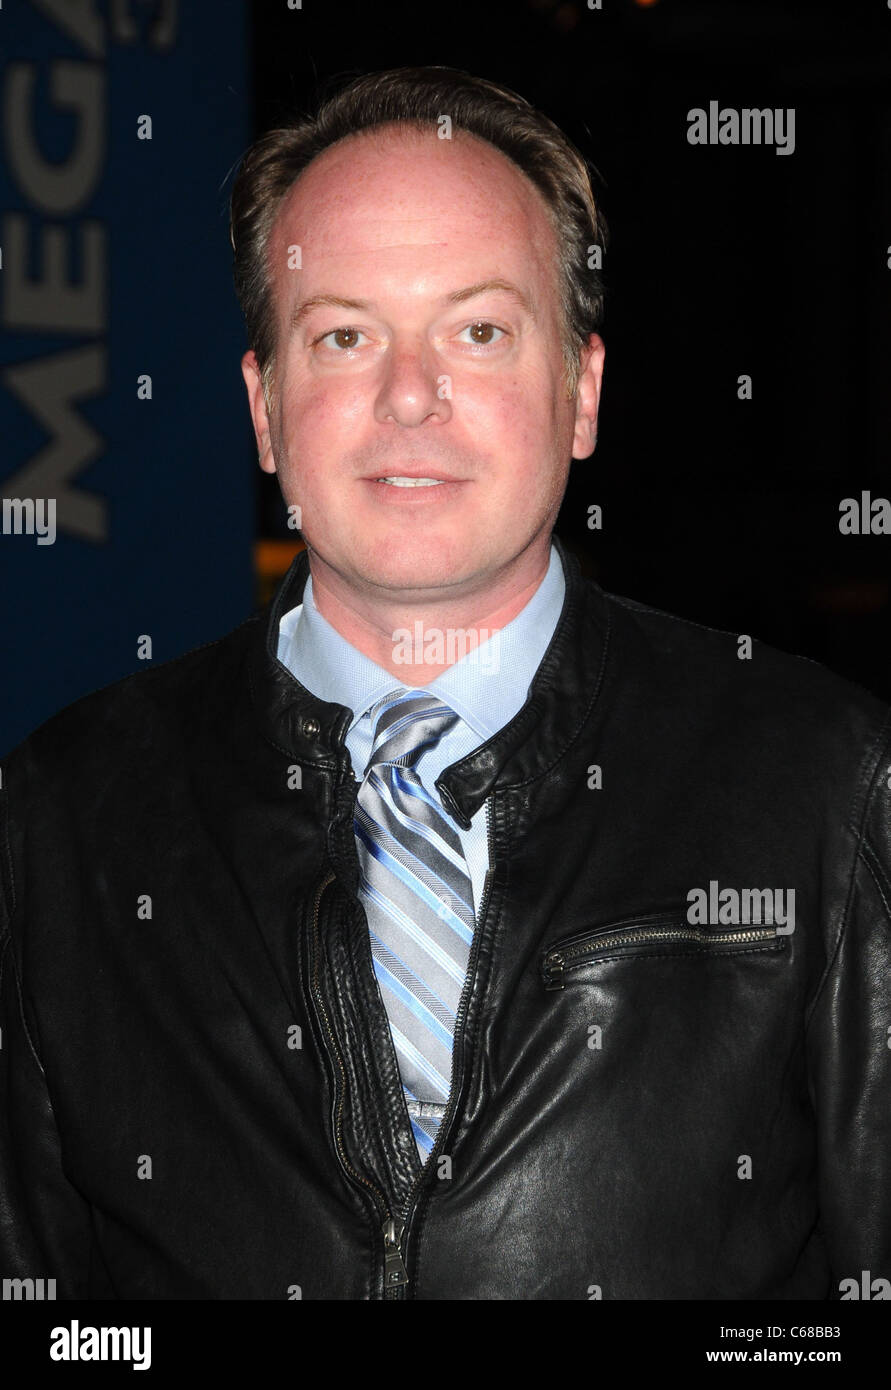 Tom McGrath at arrivals for MEGAMIND Premiere, Grauman's Chinese Theatre, Los Angeles, CA October 30, 2010. Photo By: Dee Cercone/Everett Collection Stock Photo